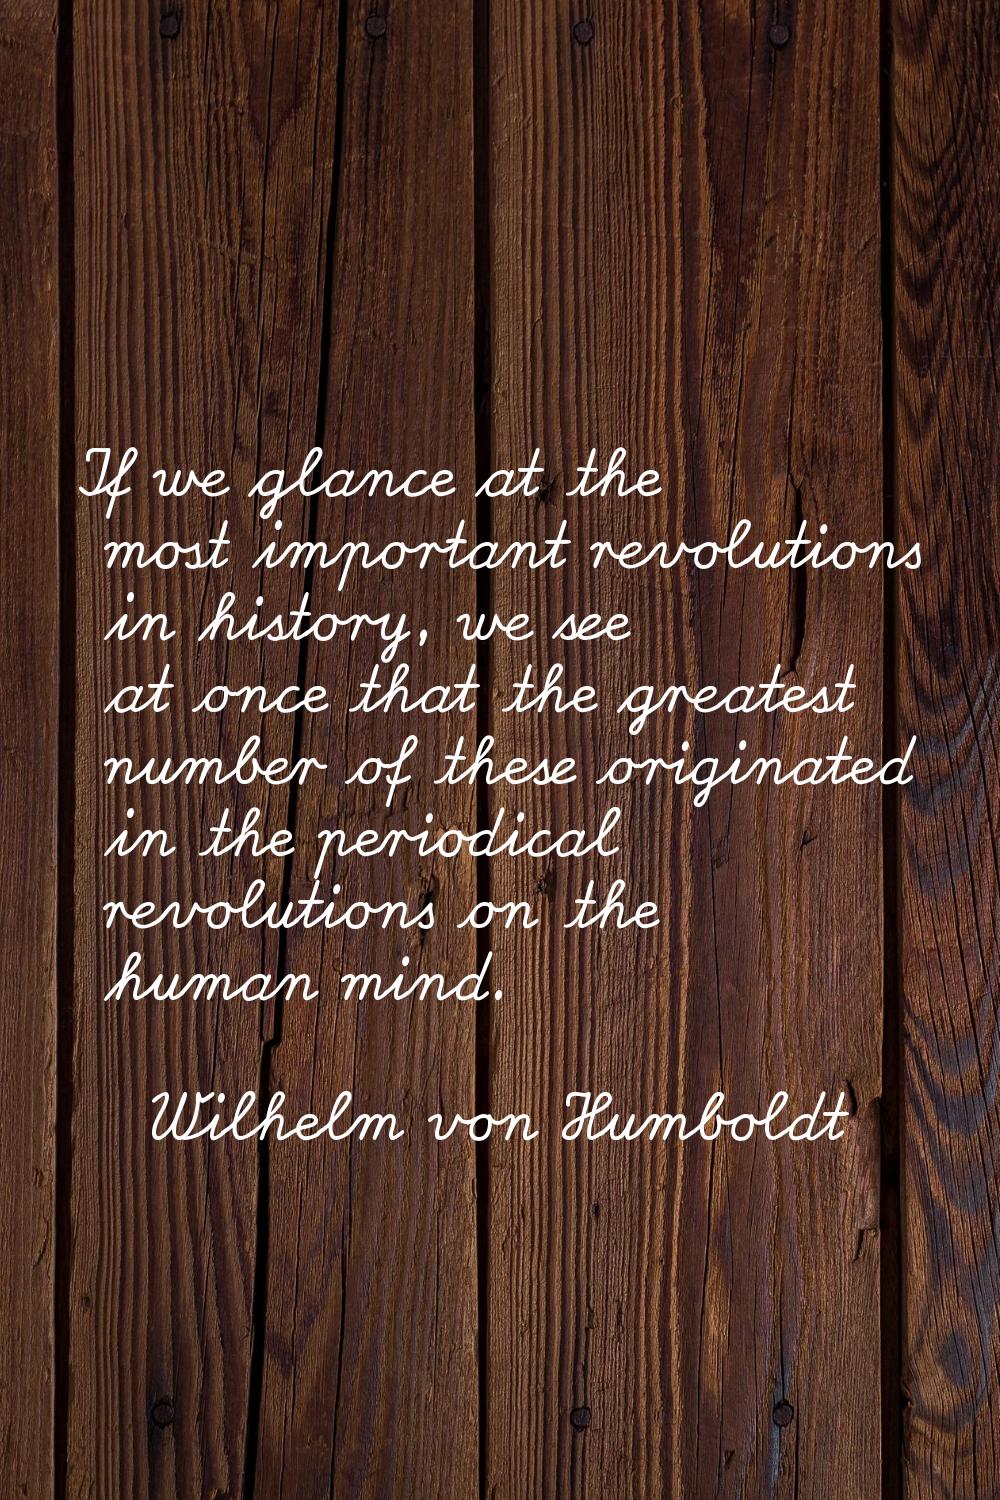 If we glance at the most important revolutions in history, we see at once that the greatest number 